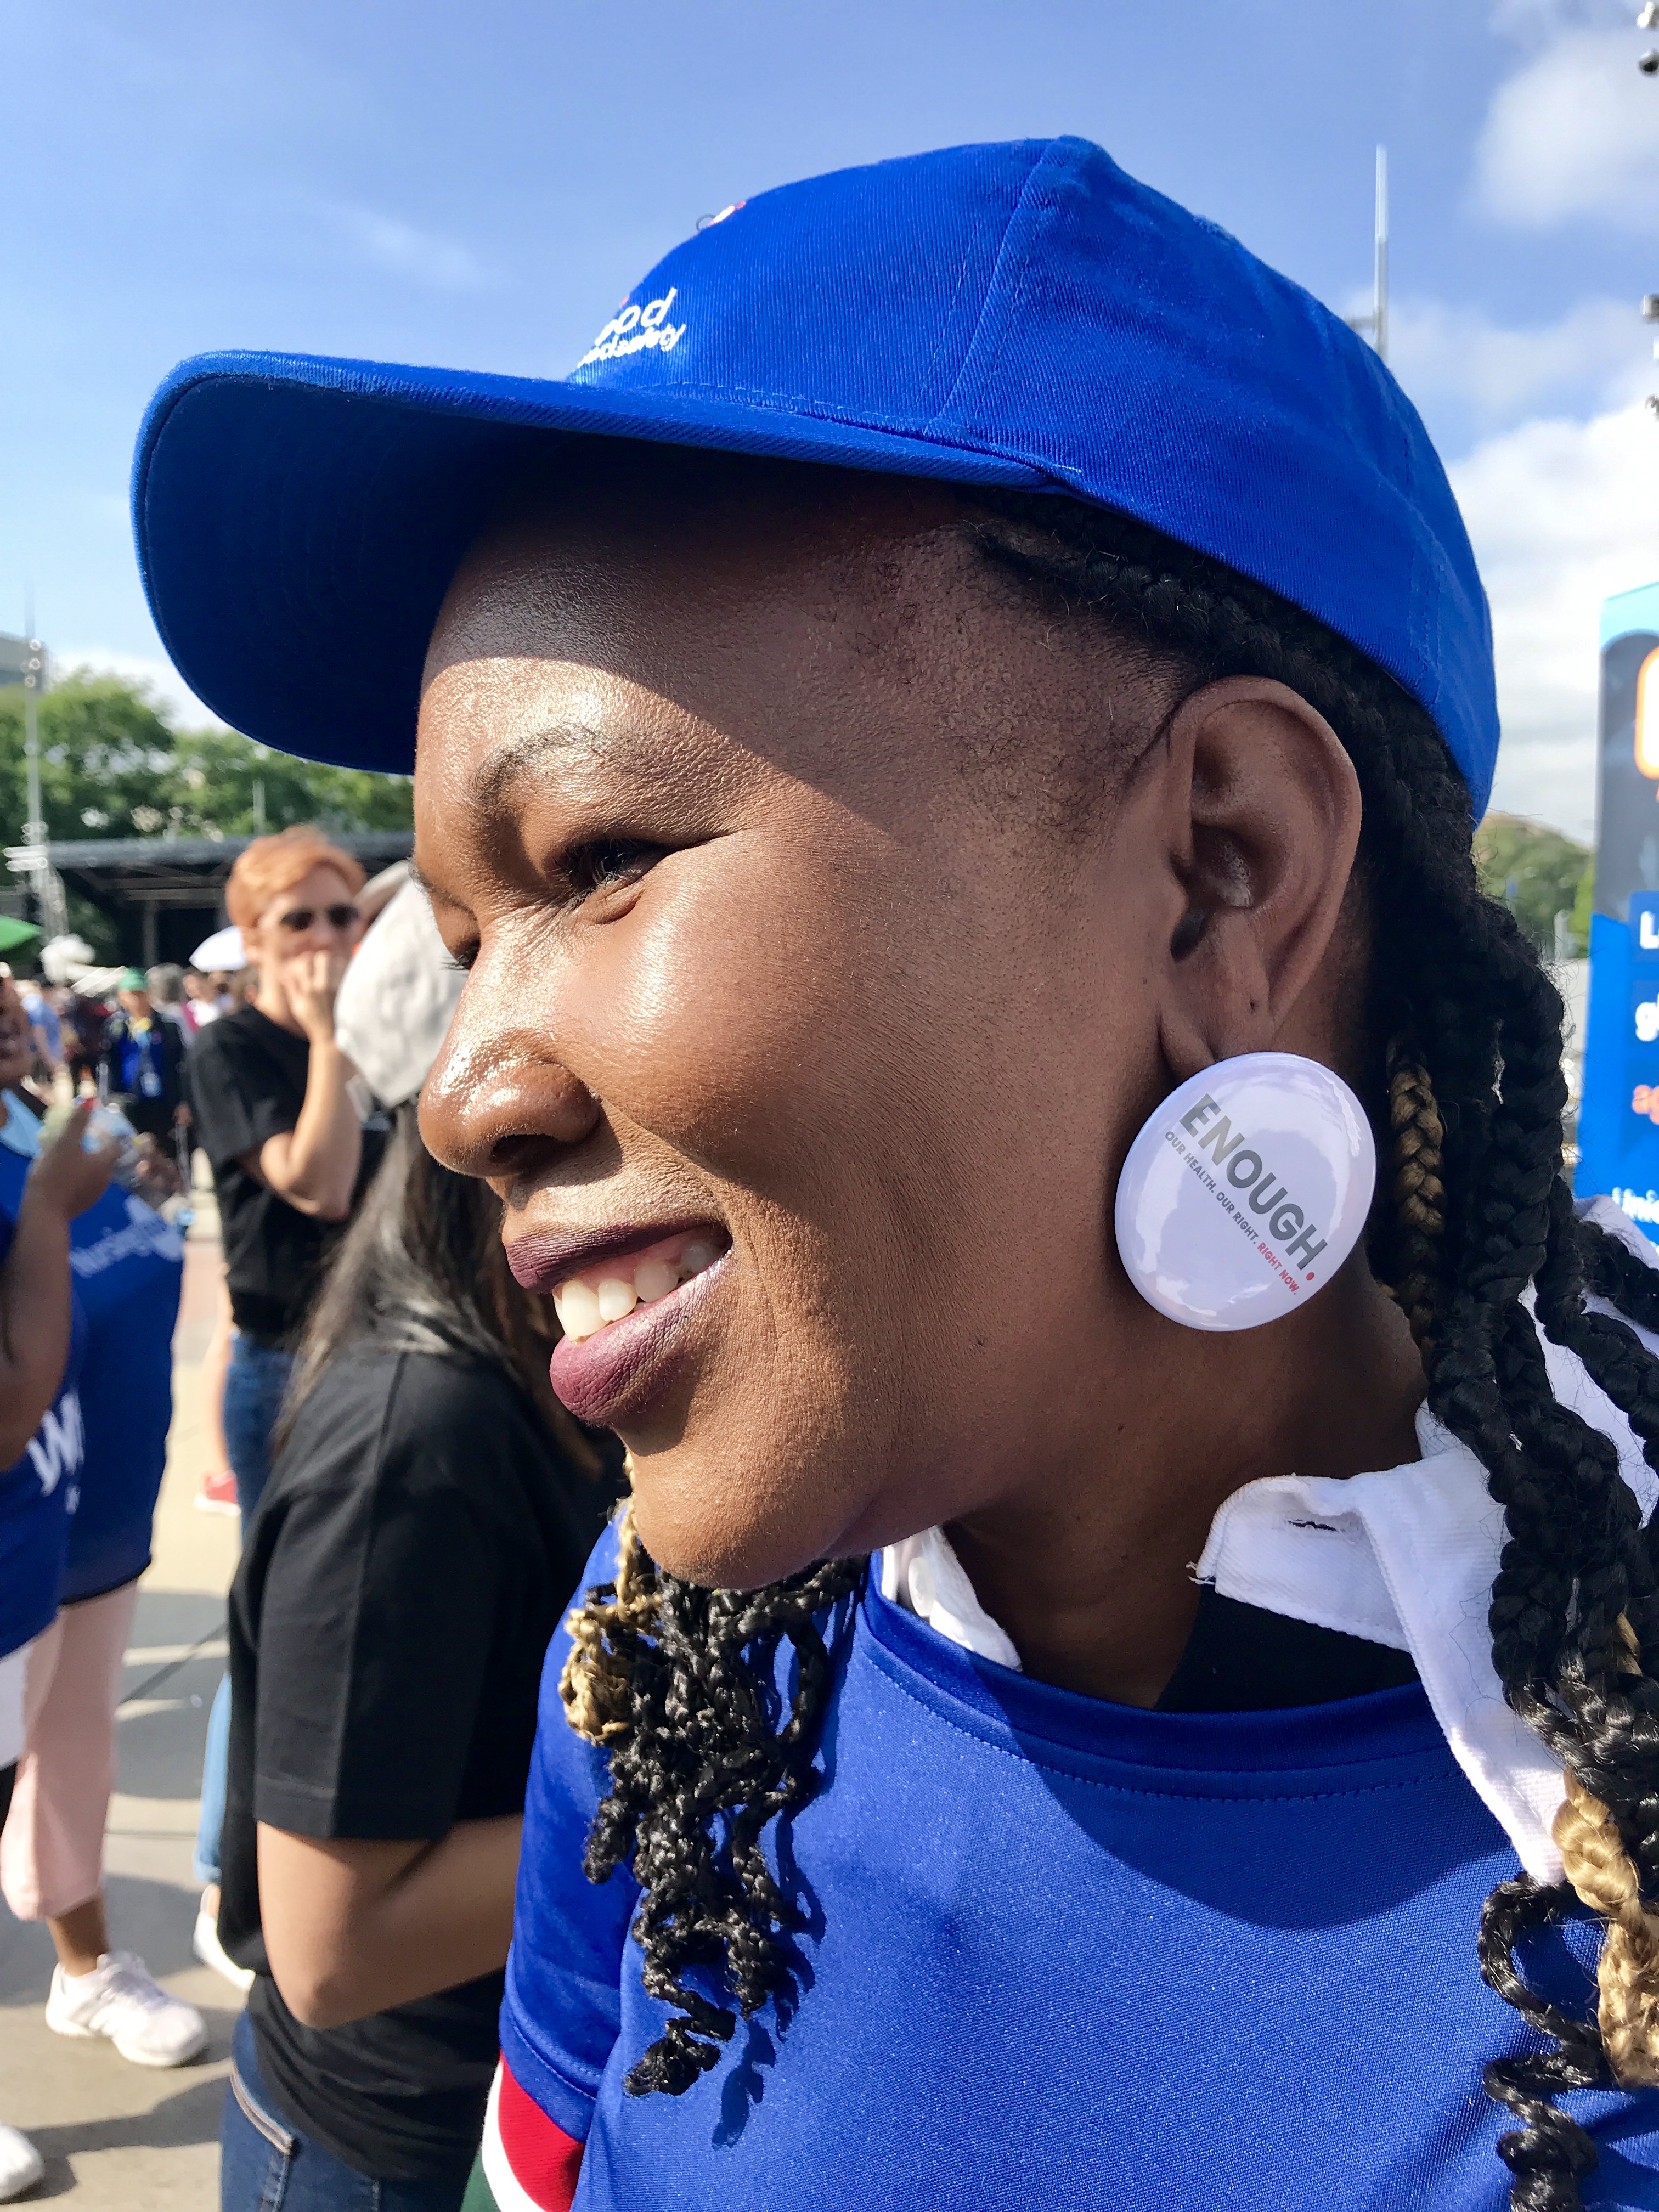 A woman wears a button of the Enough campaign as an earring.